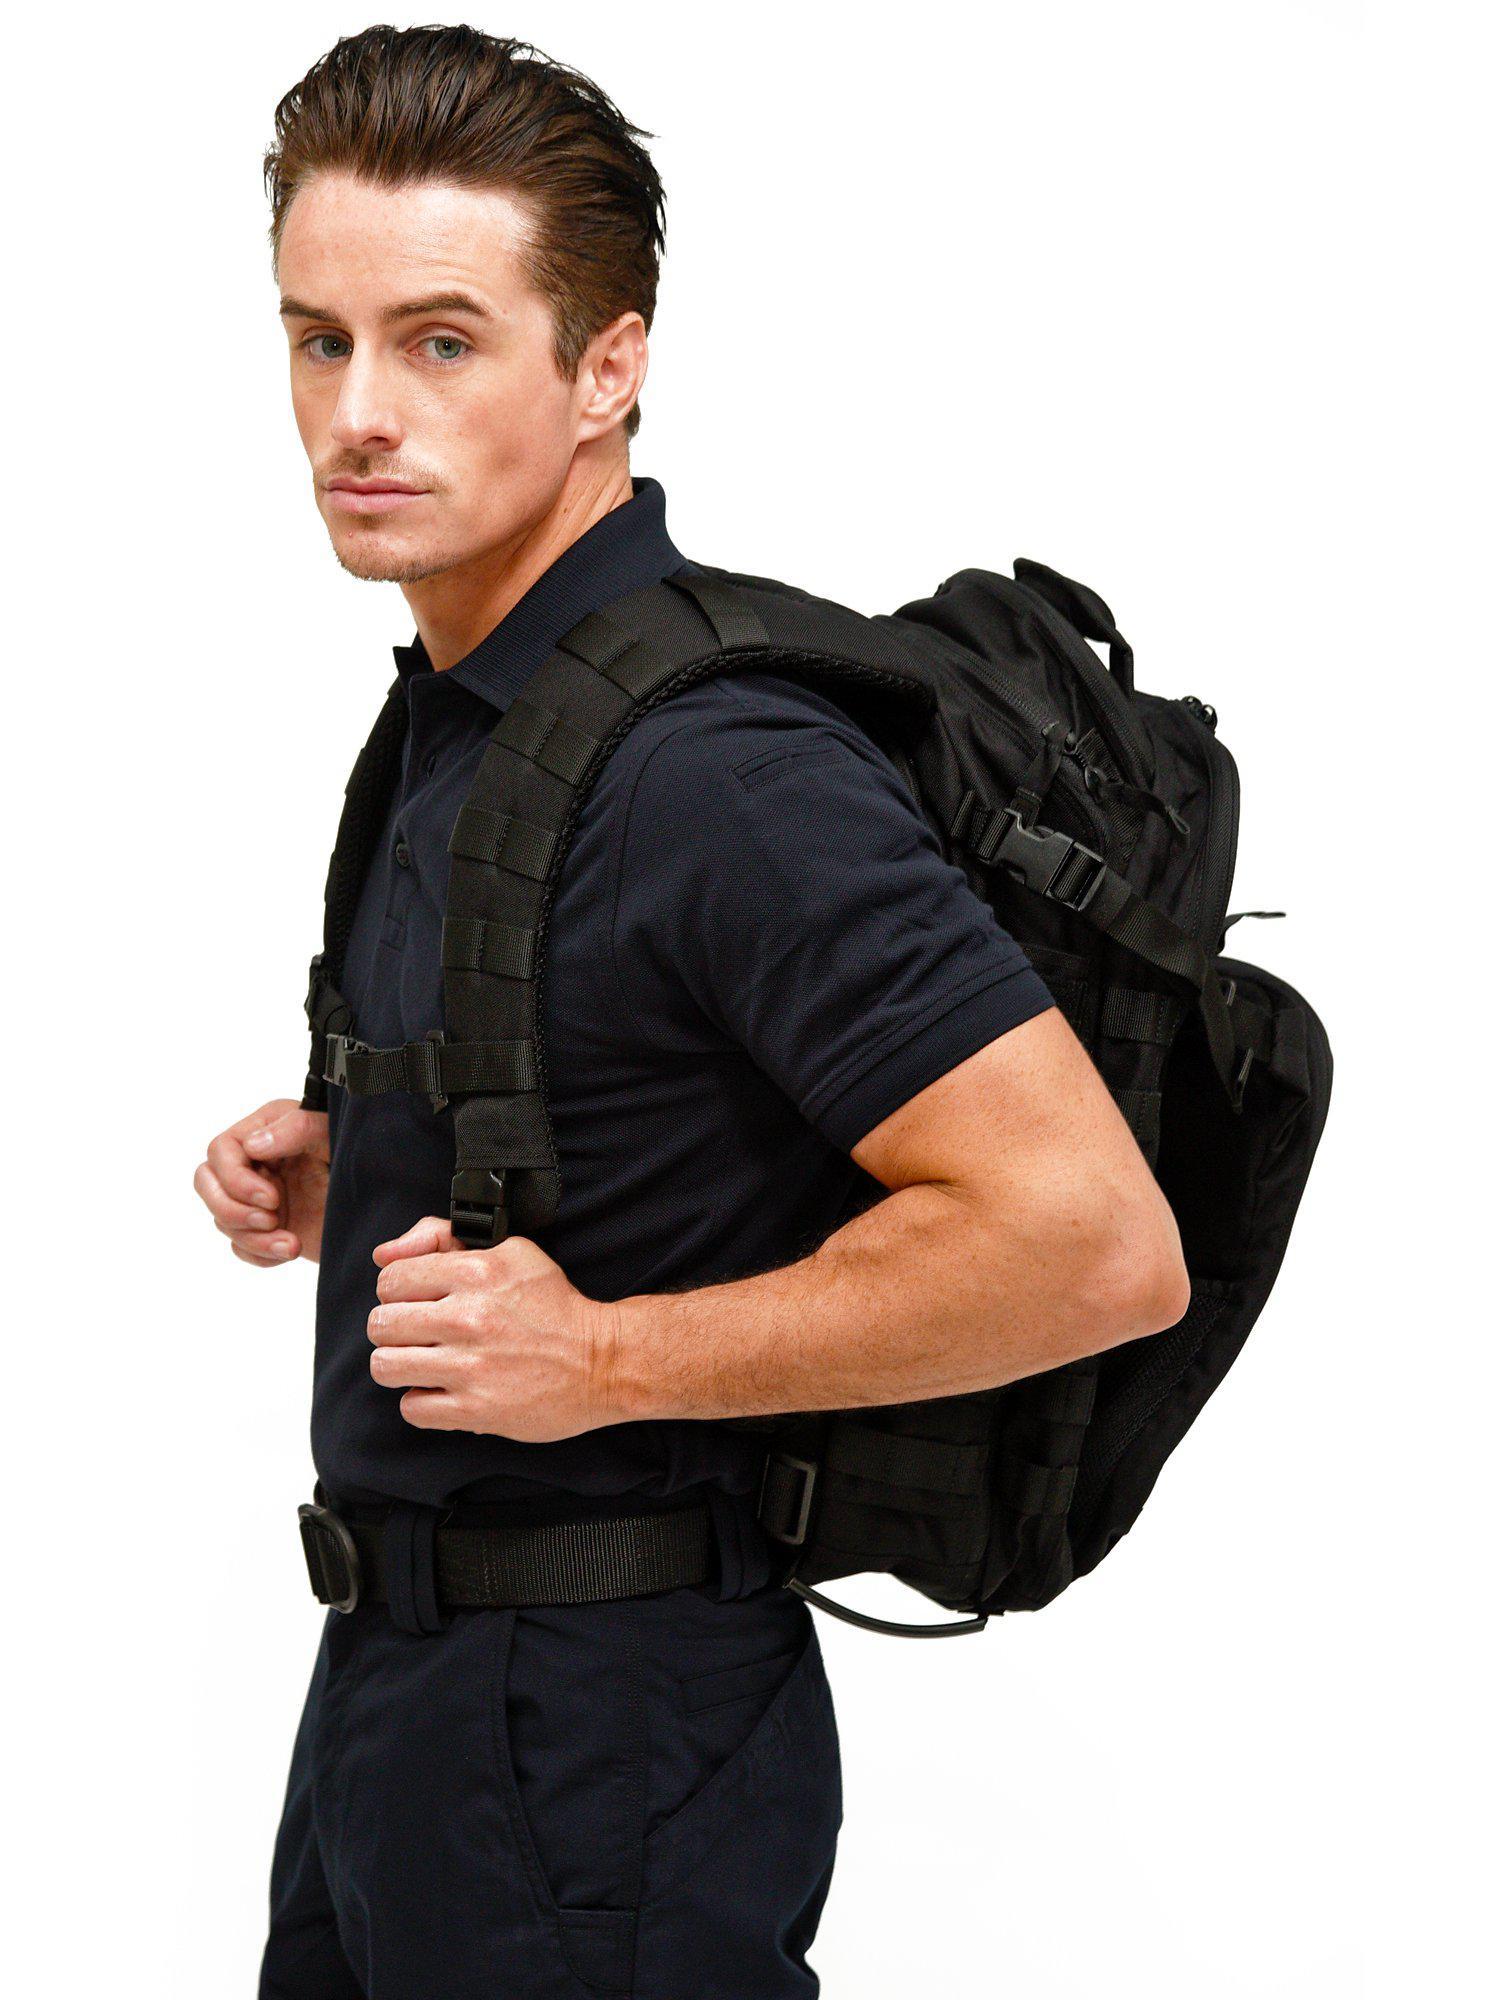 5.11 Tactical All Hazards Prime Backpack - TacSource